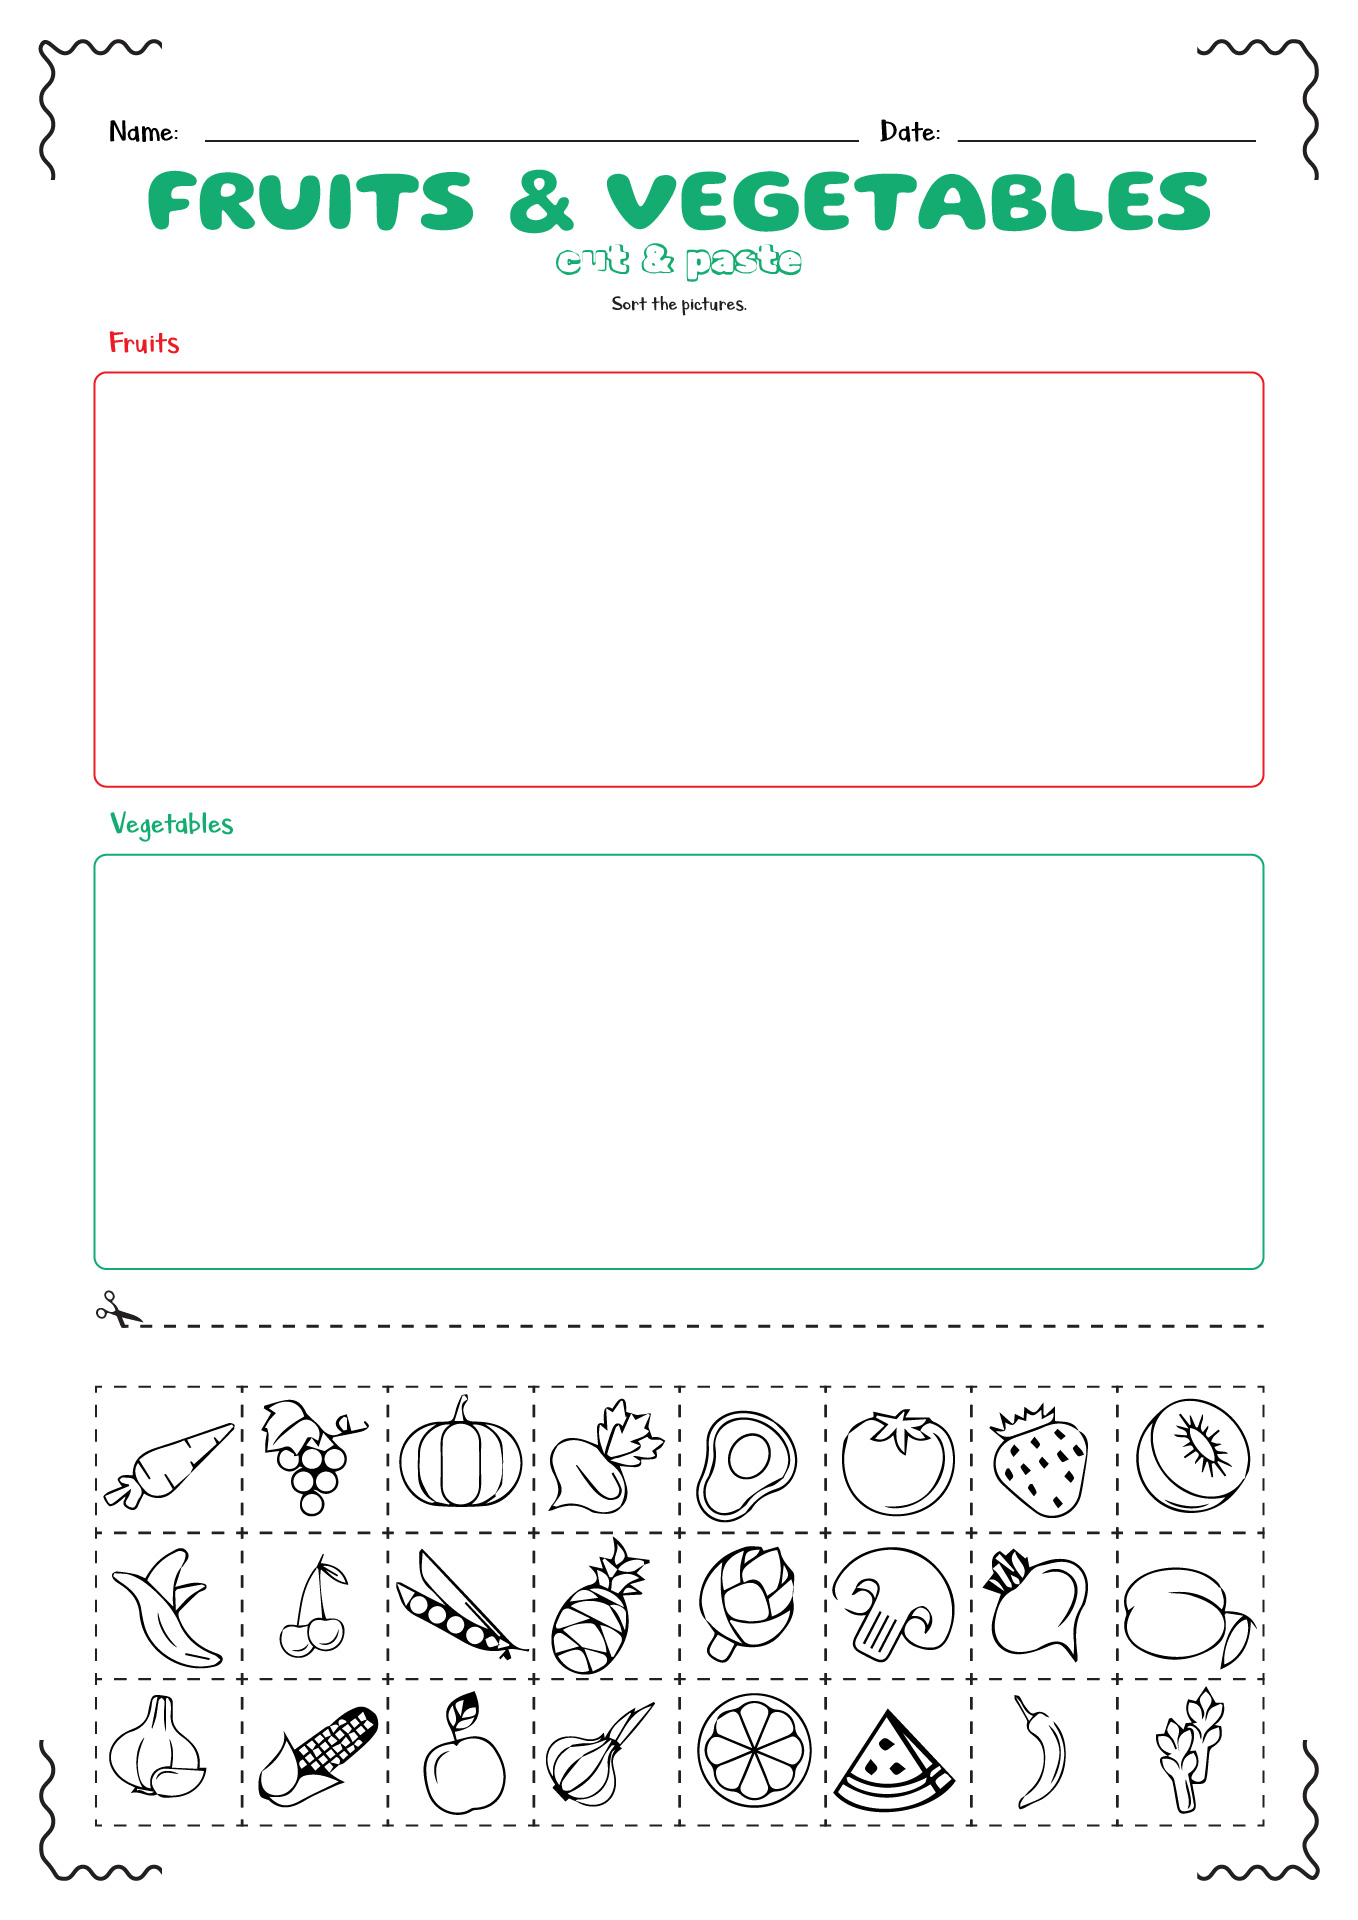 Fruits and Vegetables Cut Outs Worksheets